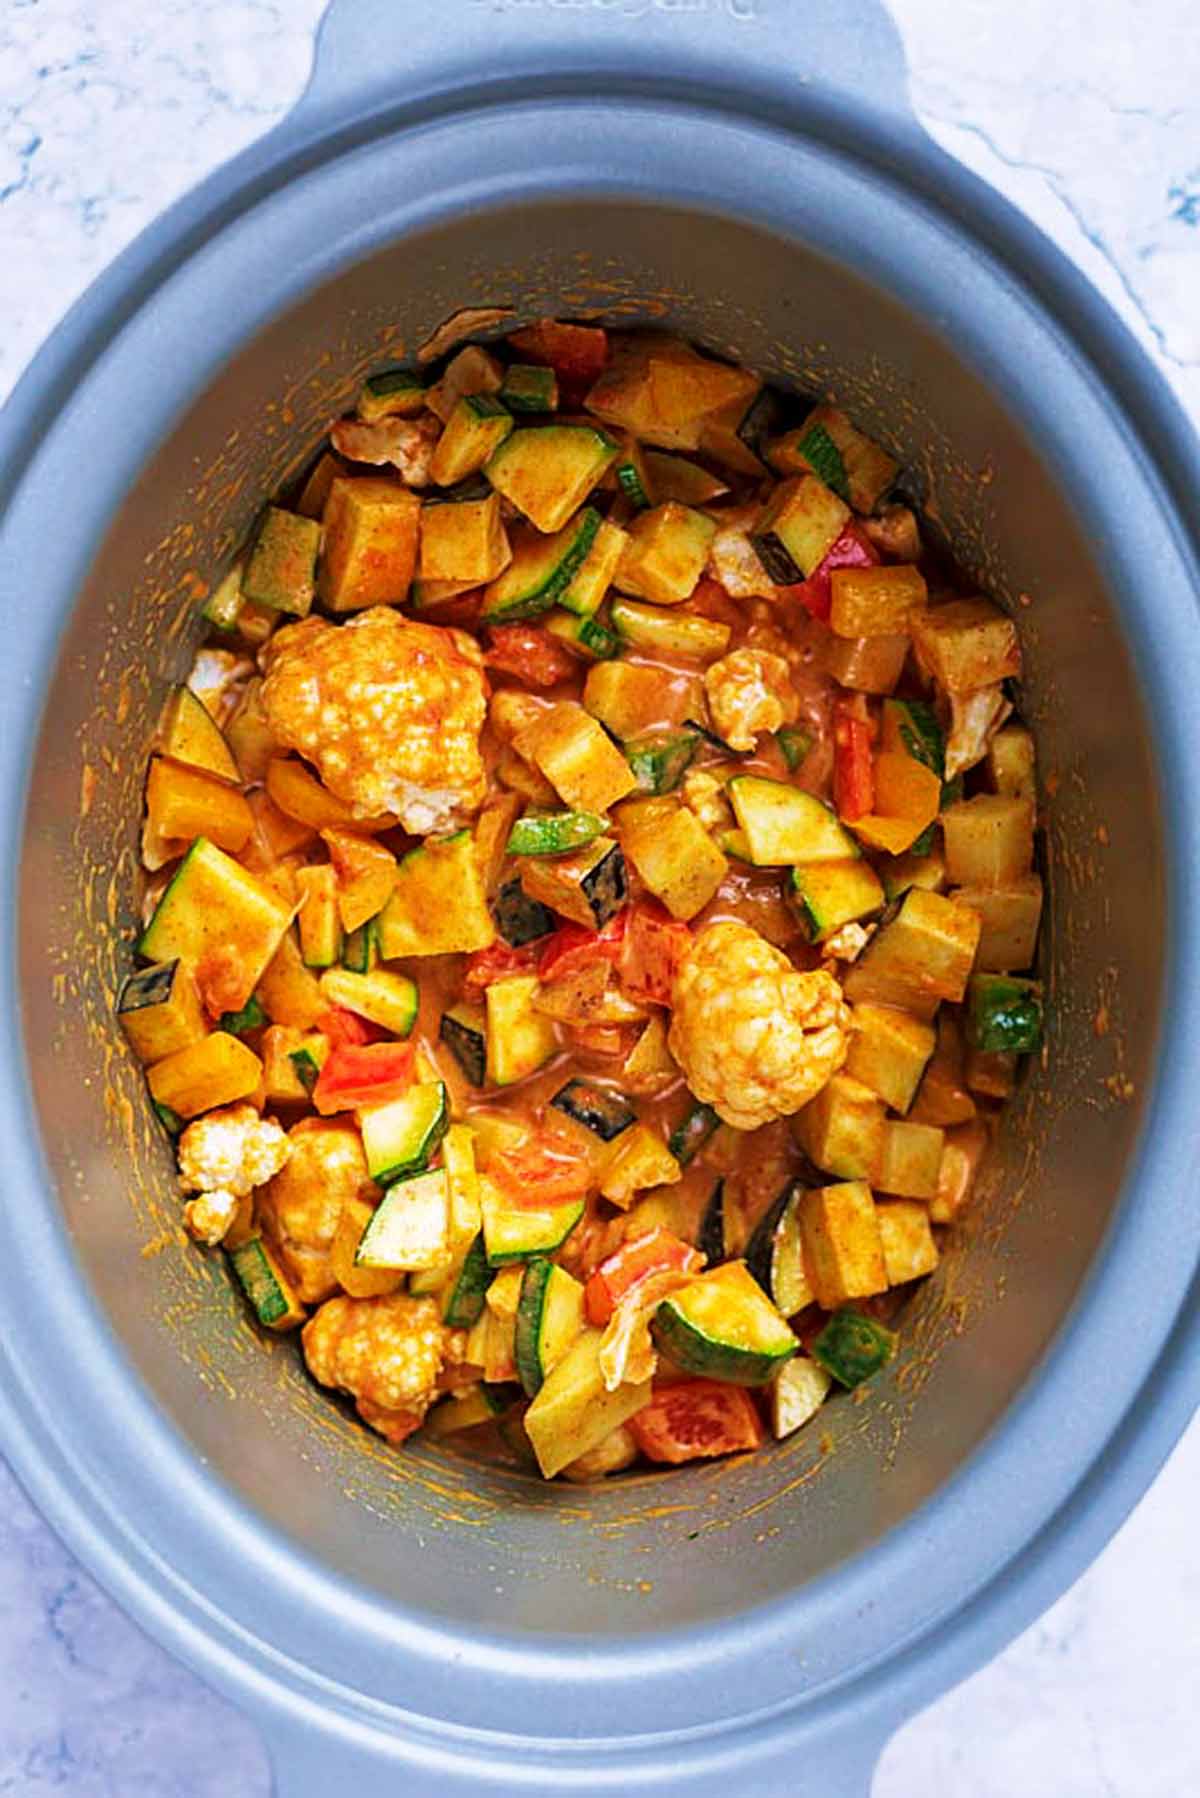 Chopped vegetables in a curry sauce in a slow cooker bowl.